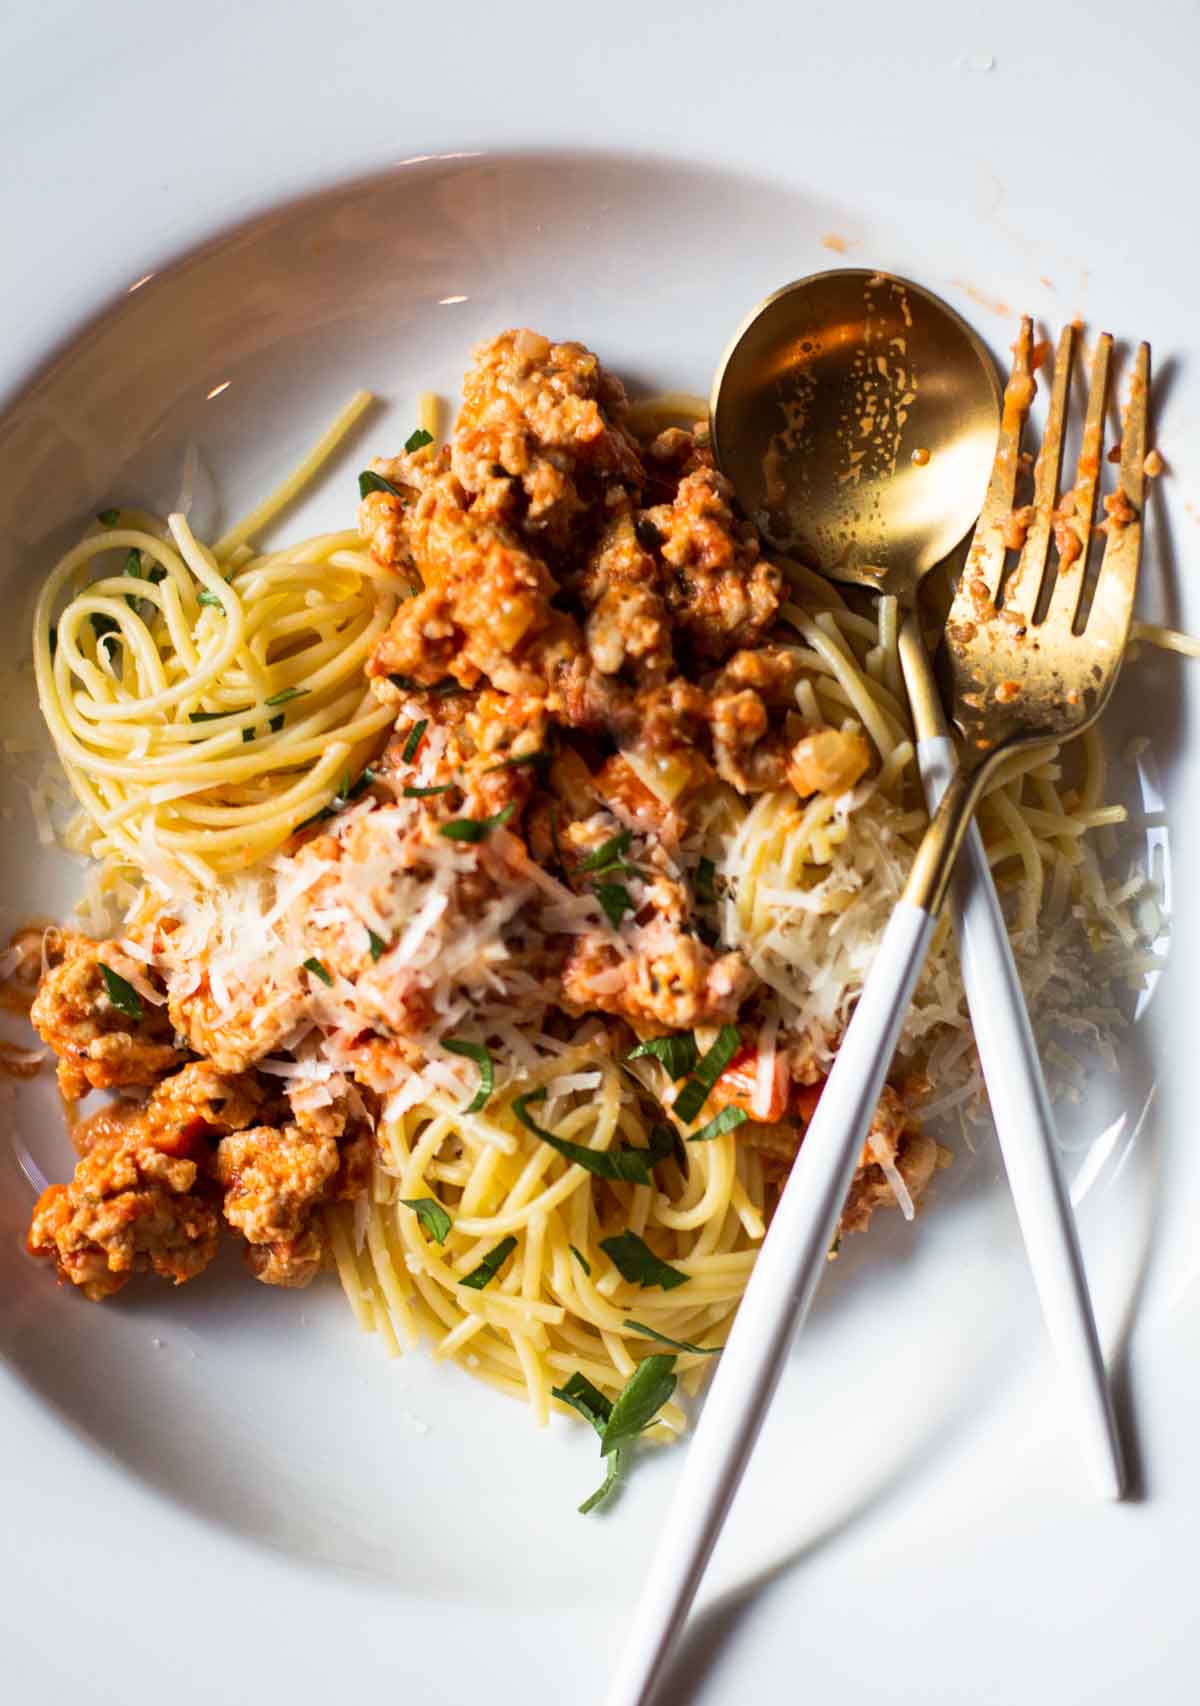 Chicken bolognese served on a pasta plate topped with parmesan cheese.